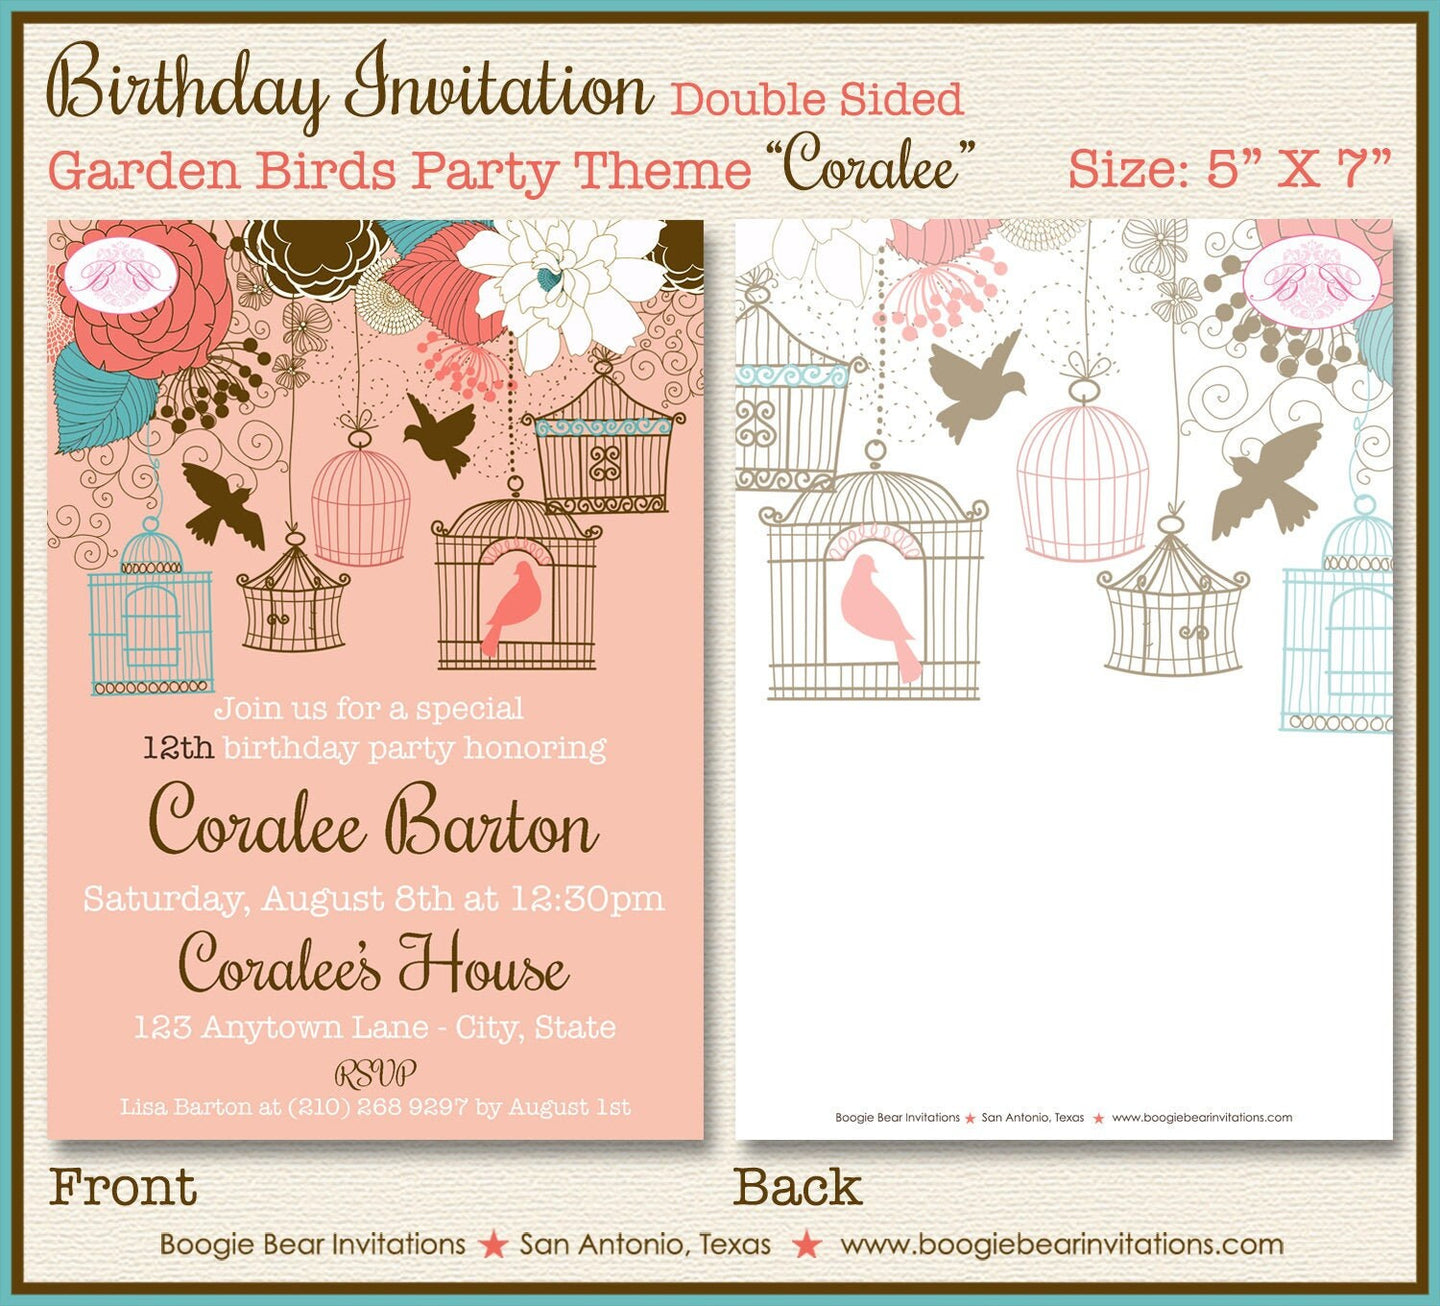 Garden Birds Birthday Party Invitation Coral Teal Blue Flowers Birdcage Cage Garden Picnic Outdoor Coralee Theme Paperless Printable Printed